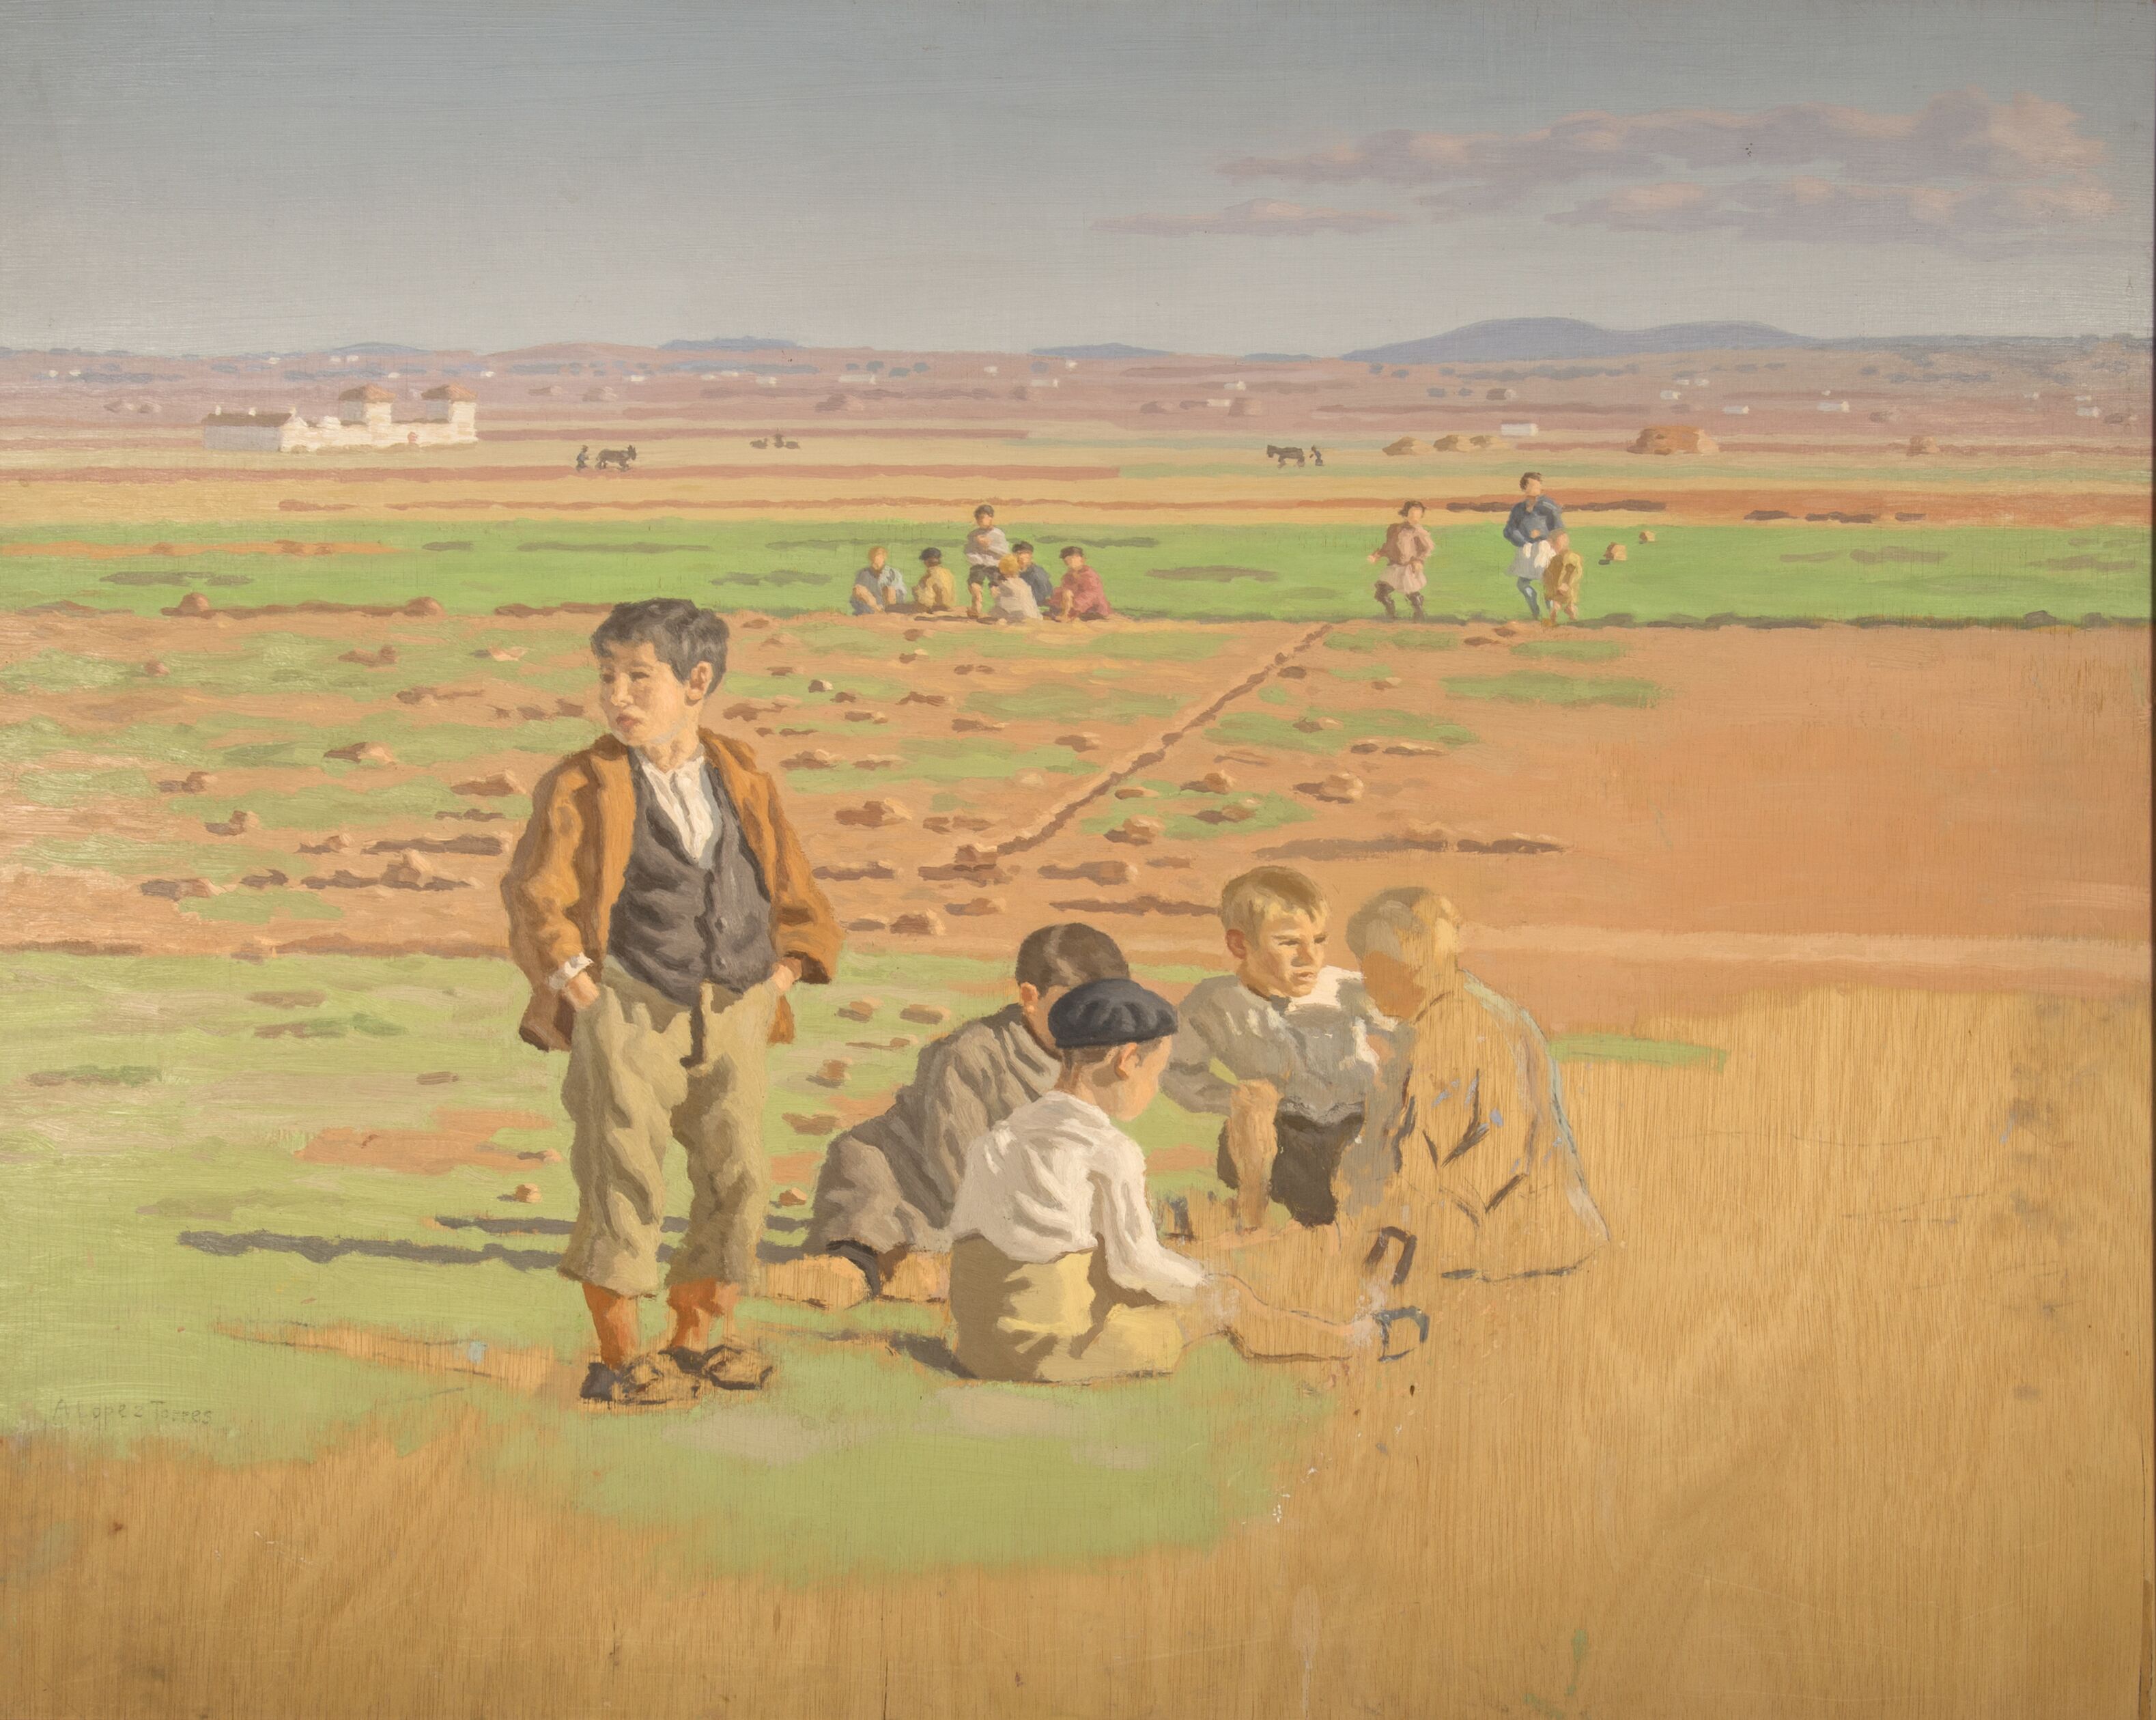 Children in the countryside